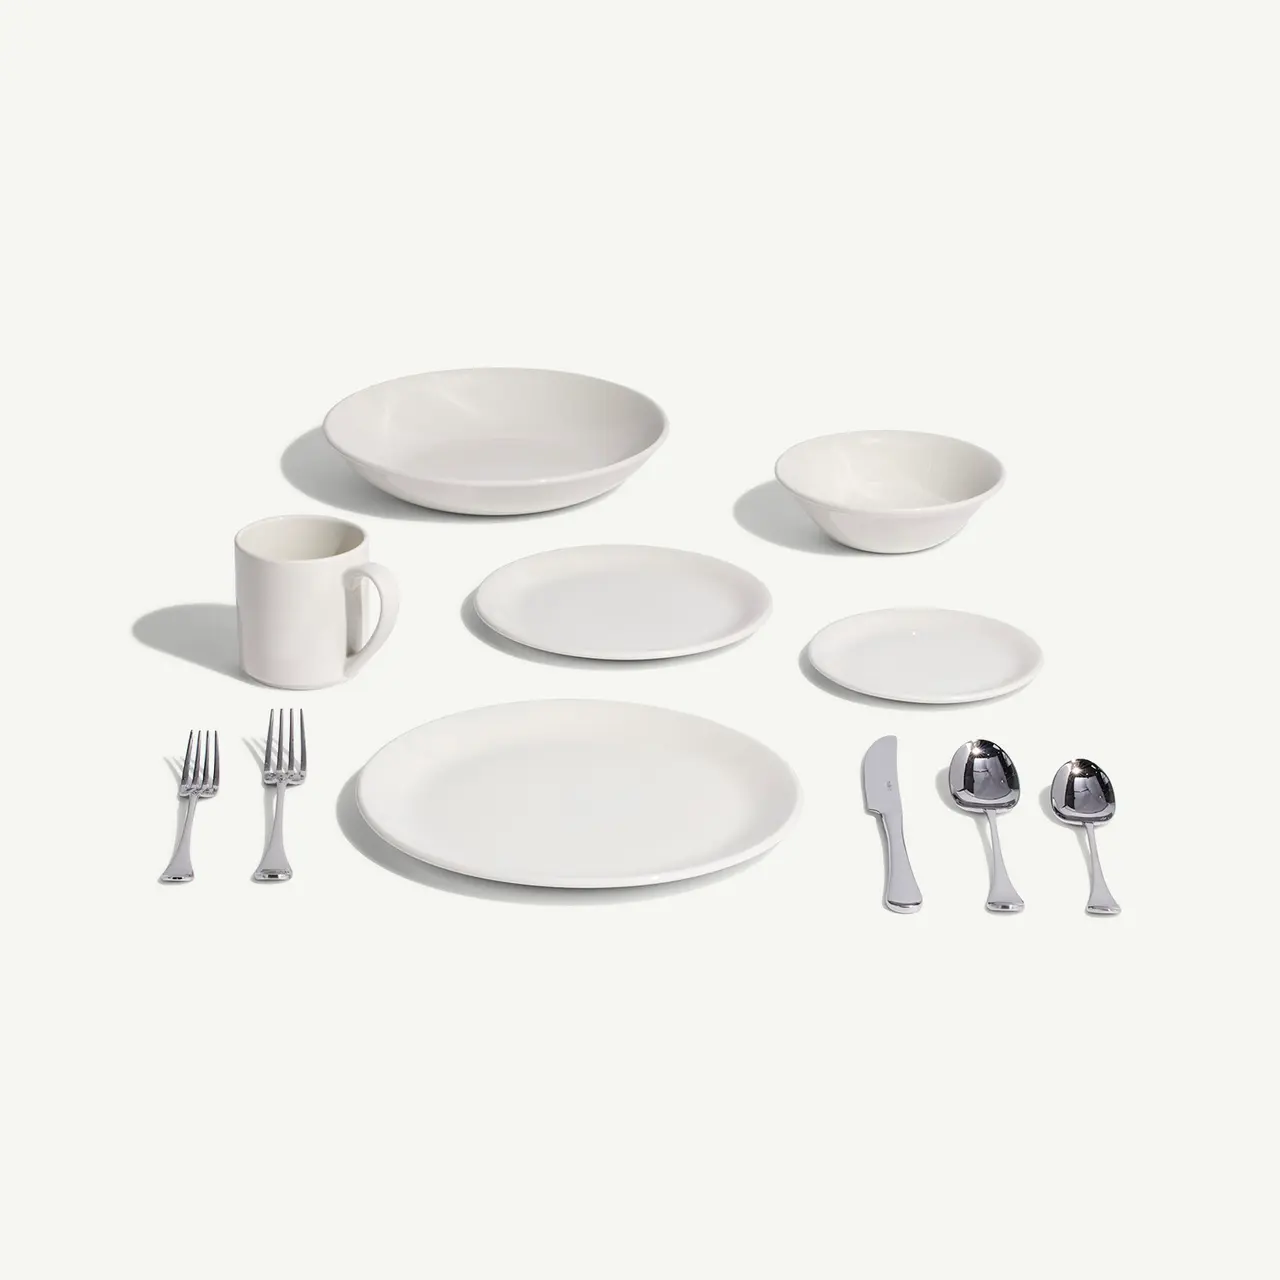 A neatly arranged set of white dinnerware and silverware against a light background.